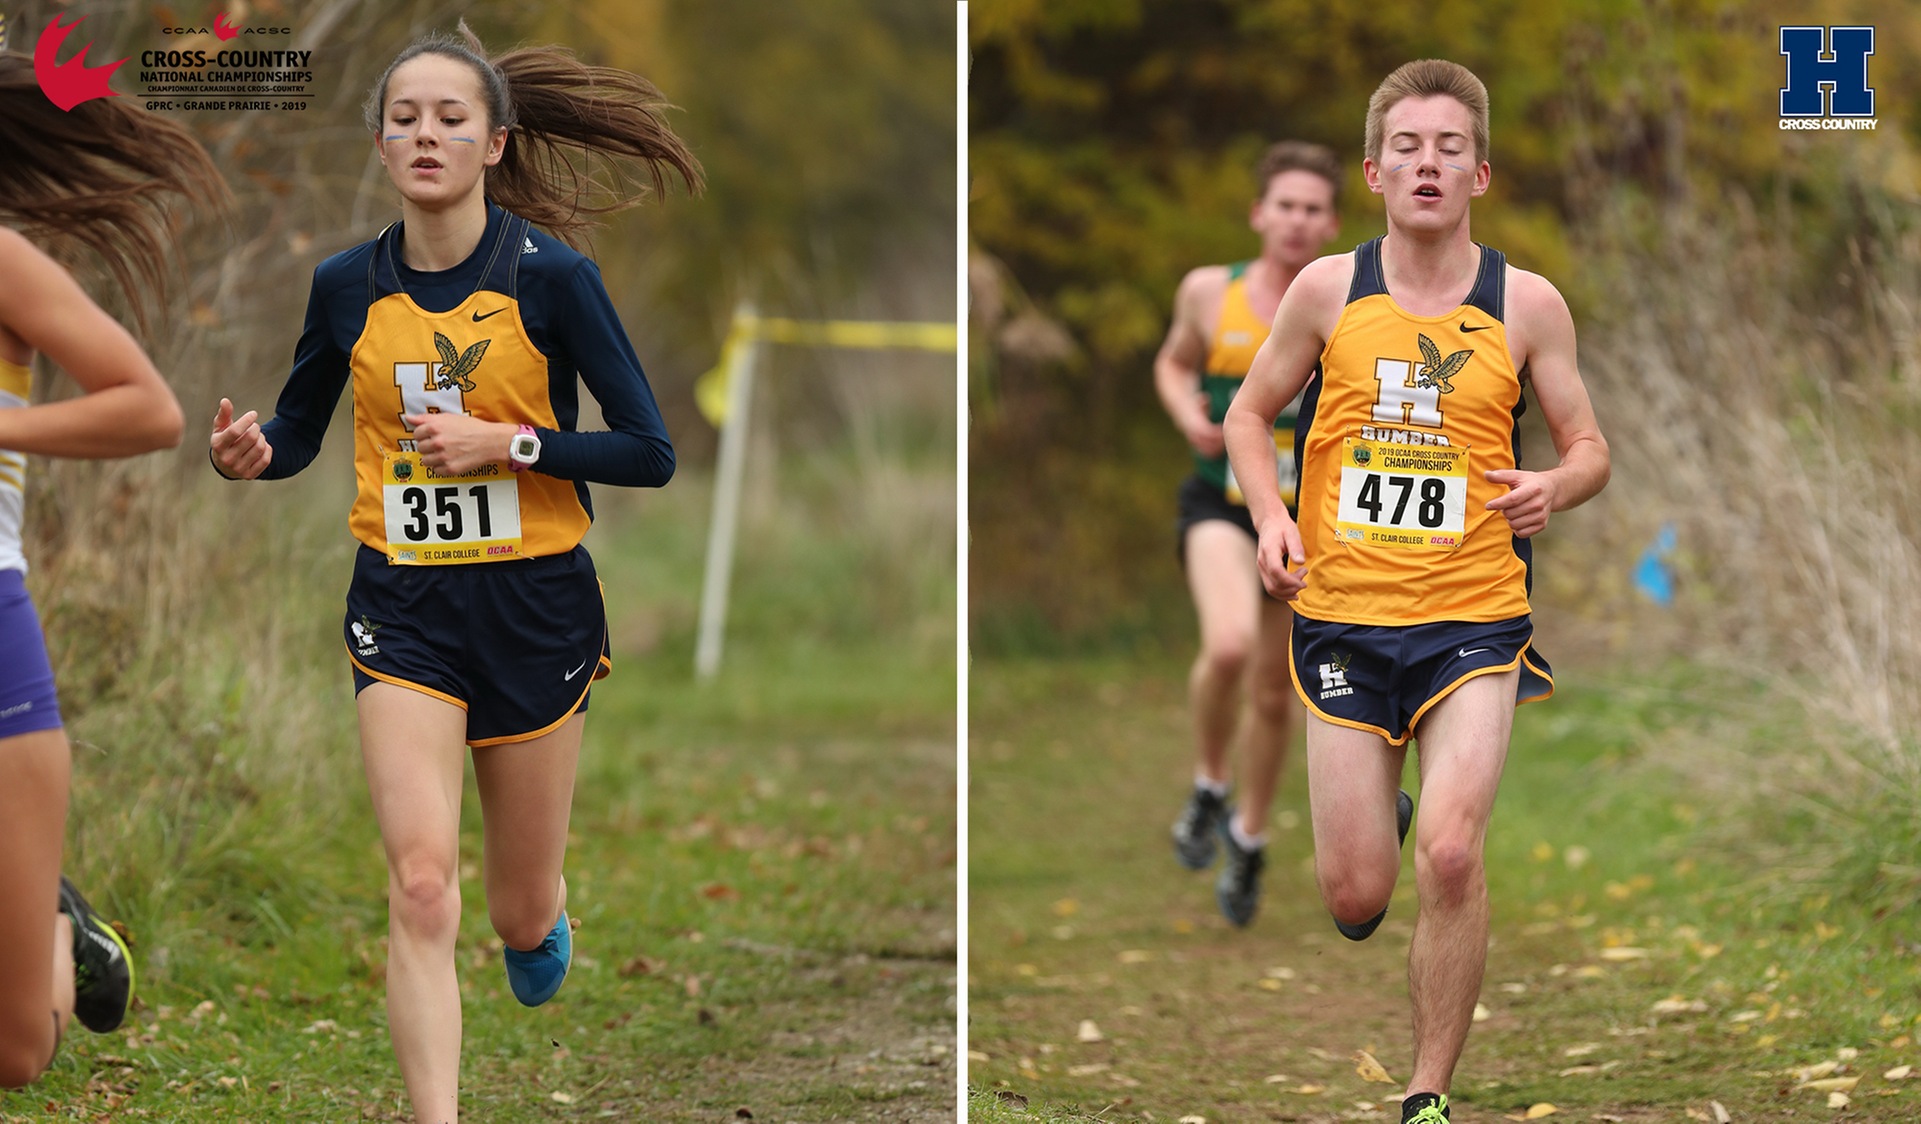 Cross Country Vies for National Title Saturday